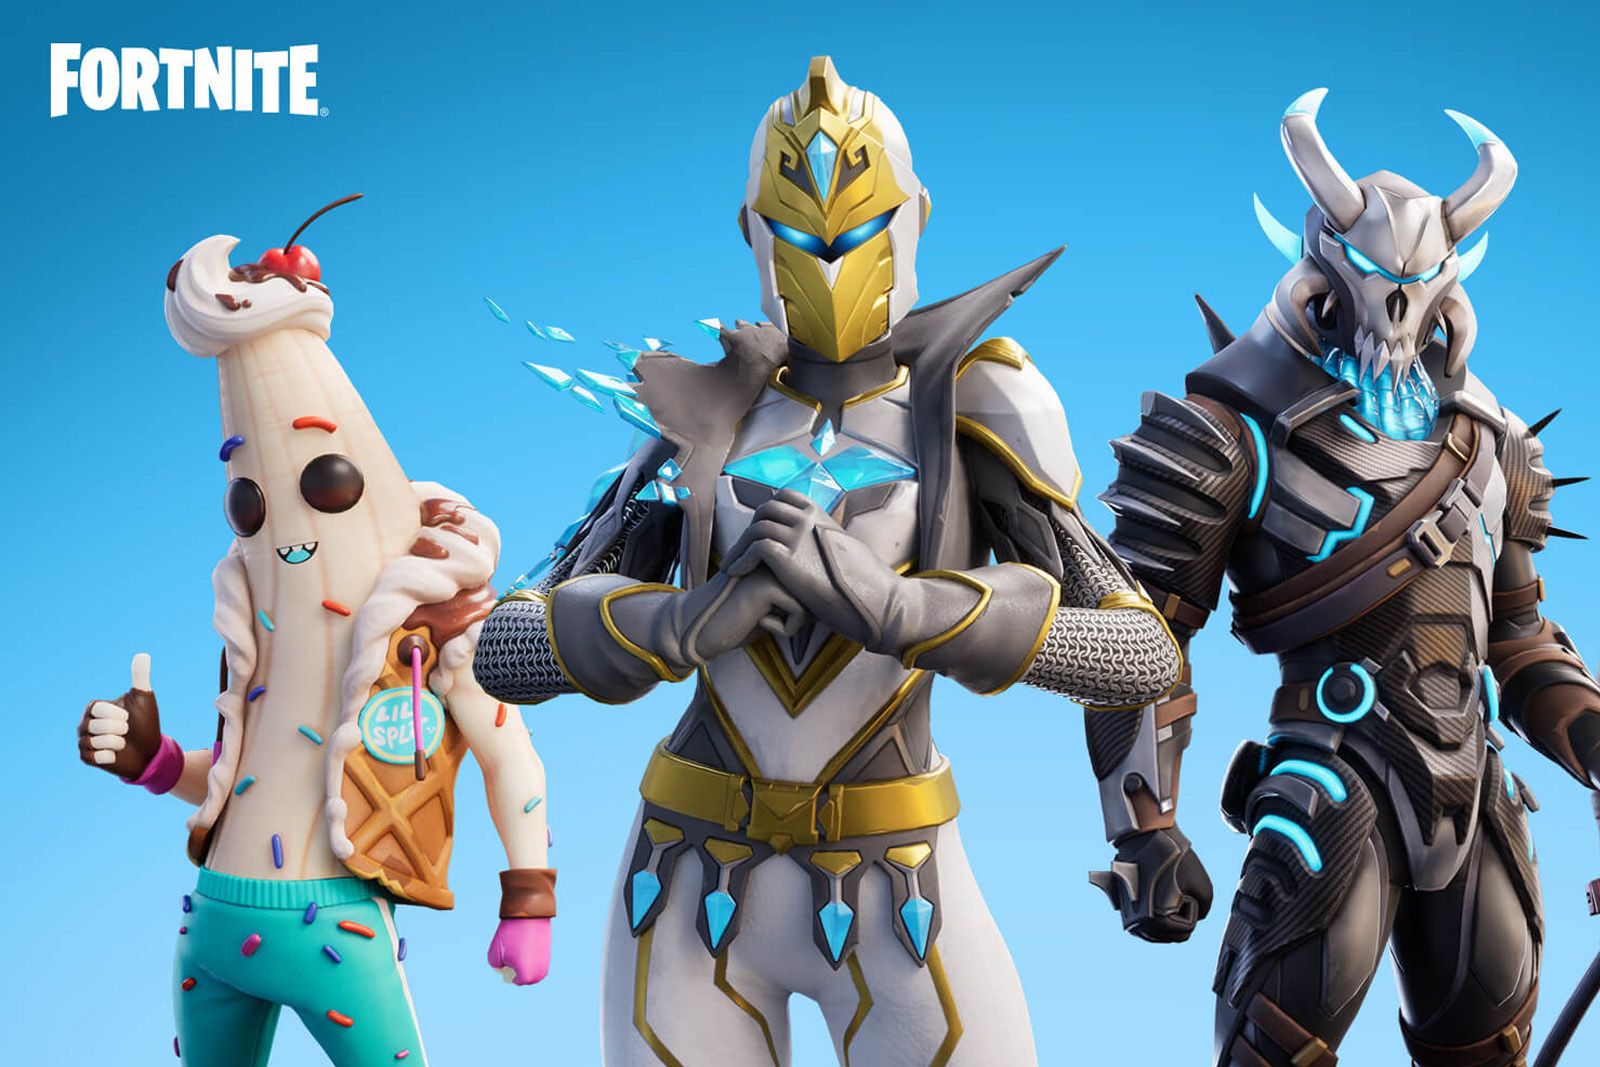 13-Year Old: Epic Games Is Turning Fortnite Into a Game for 12